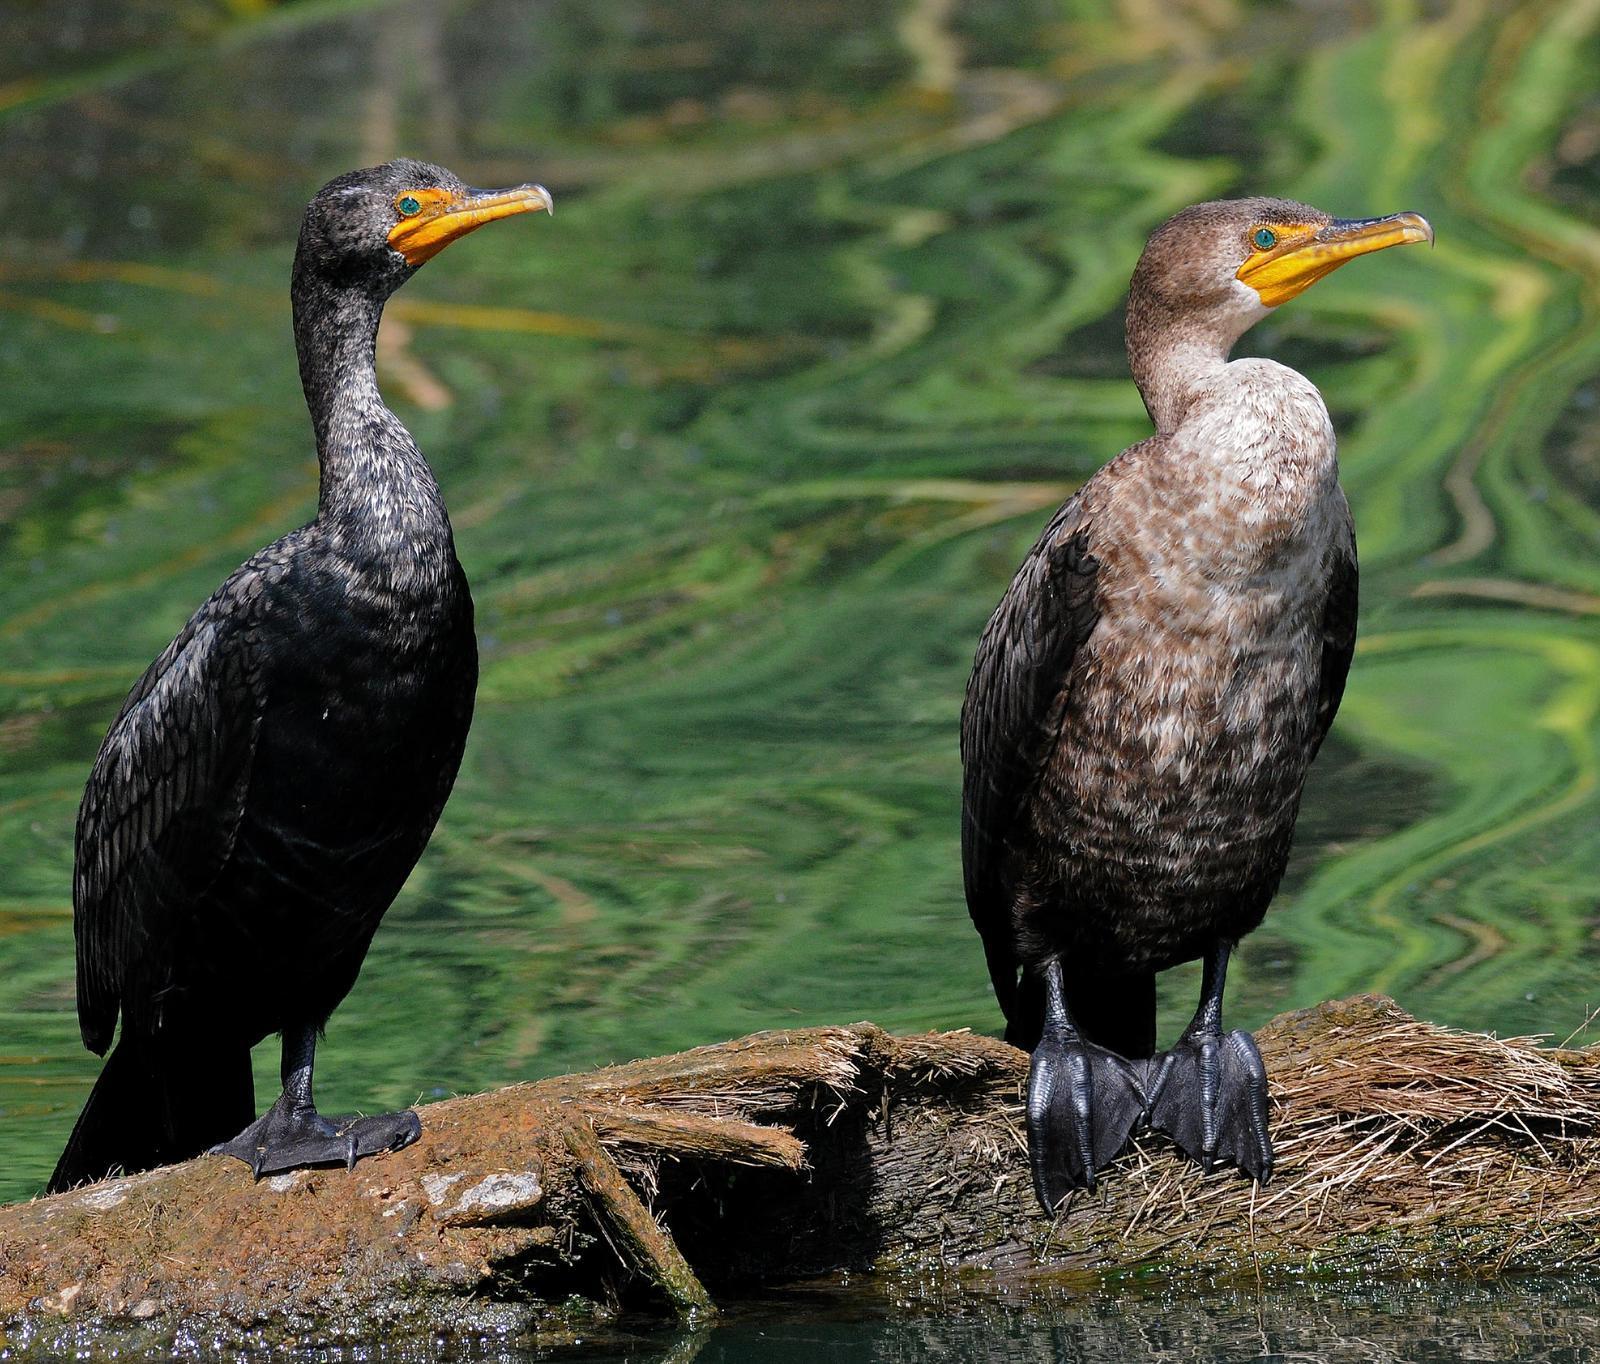 Double-crested Cormorant Photo by Steven Mlodinow